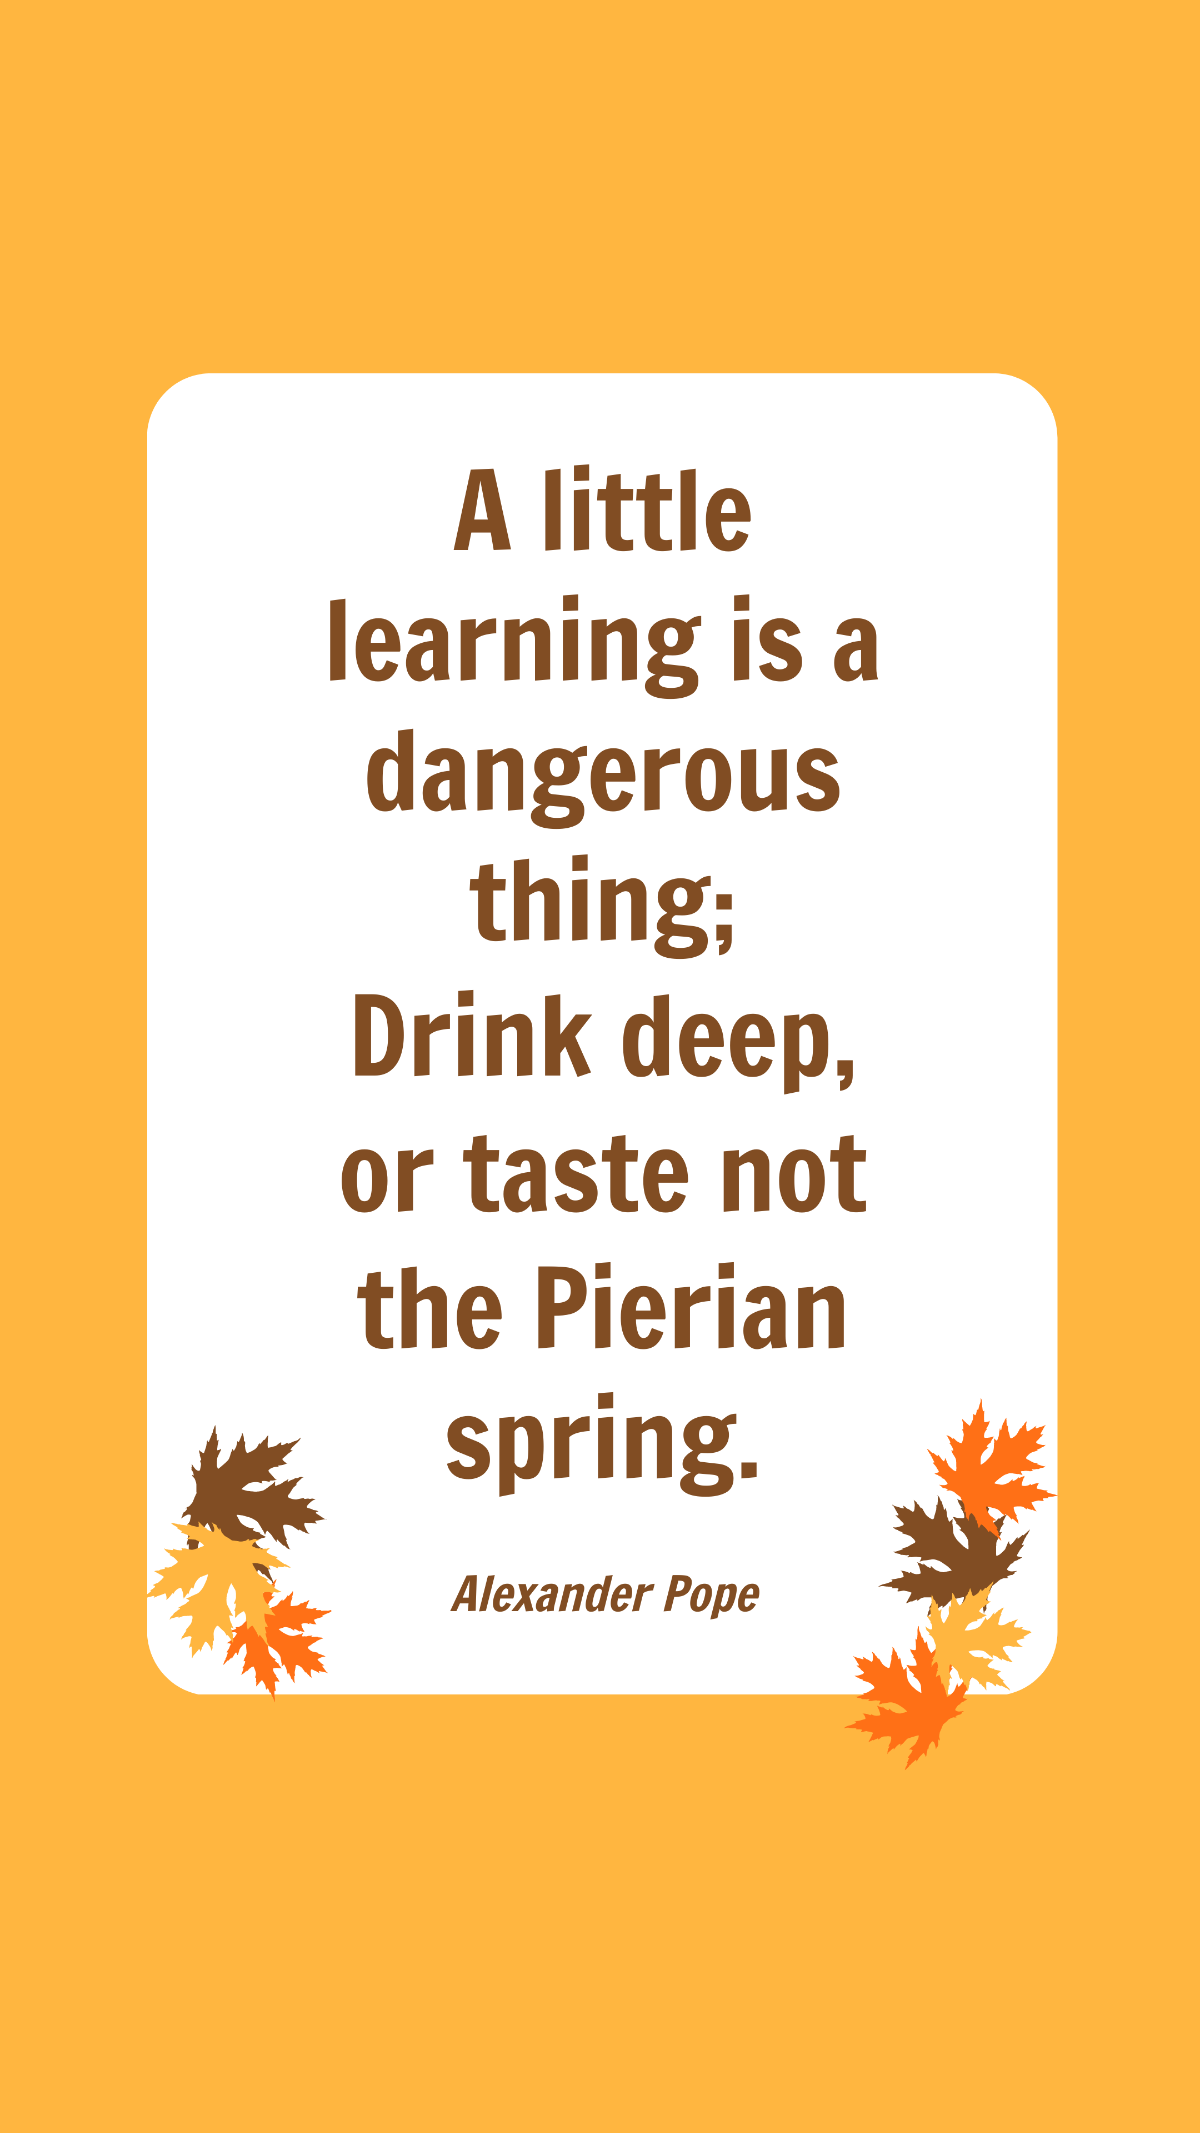 Alexander Pope - A little learning is a dangerous thing; Drink deep, or taste not the Pierian spring.